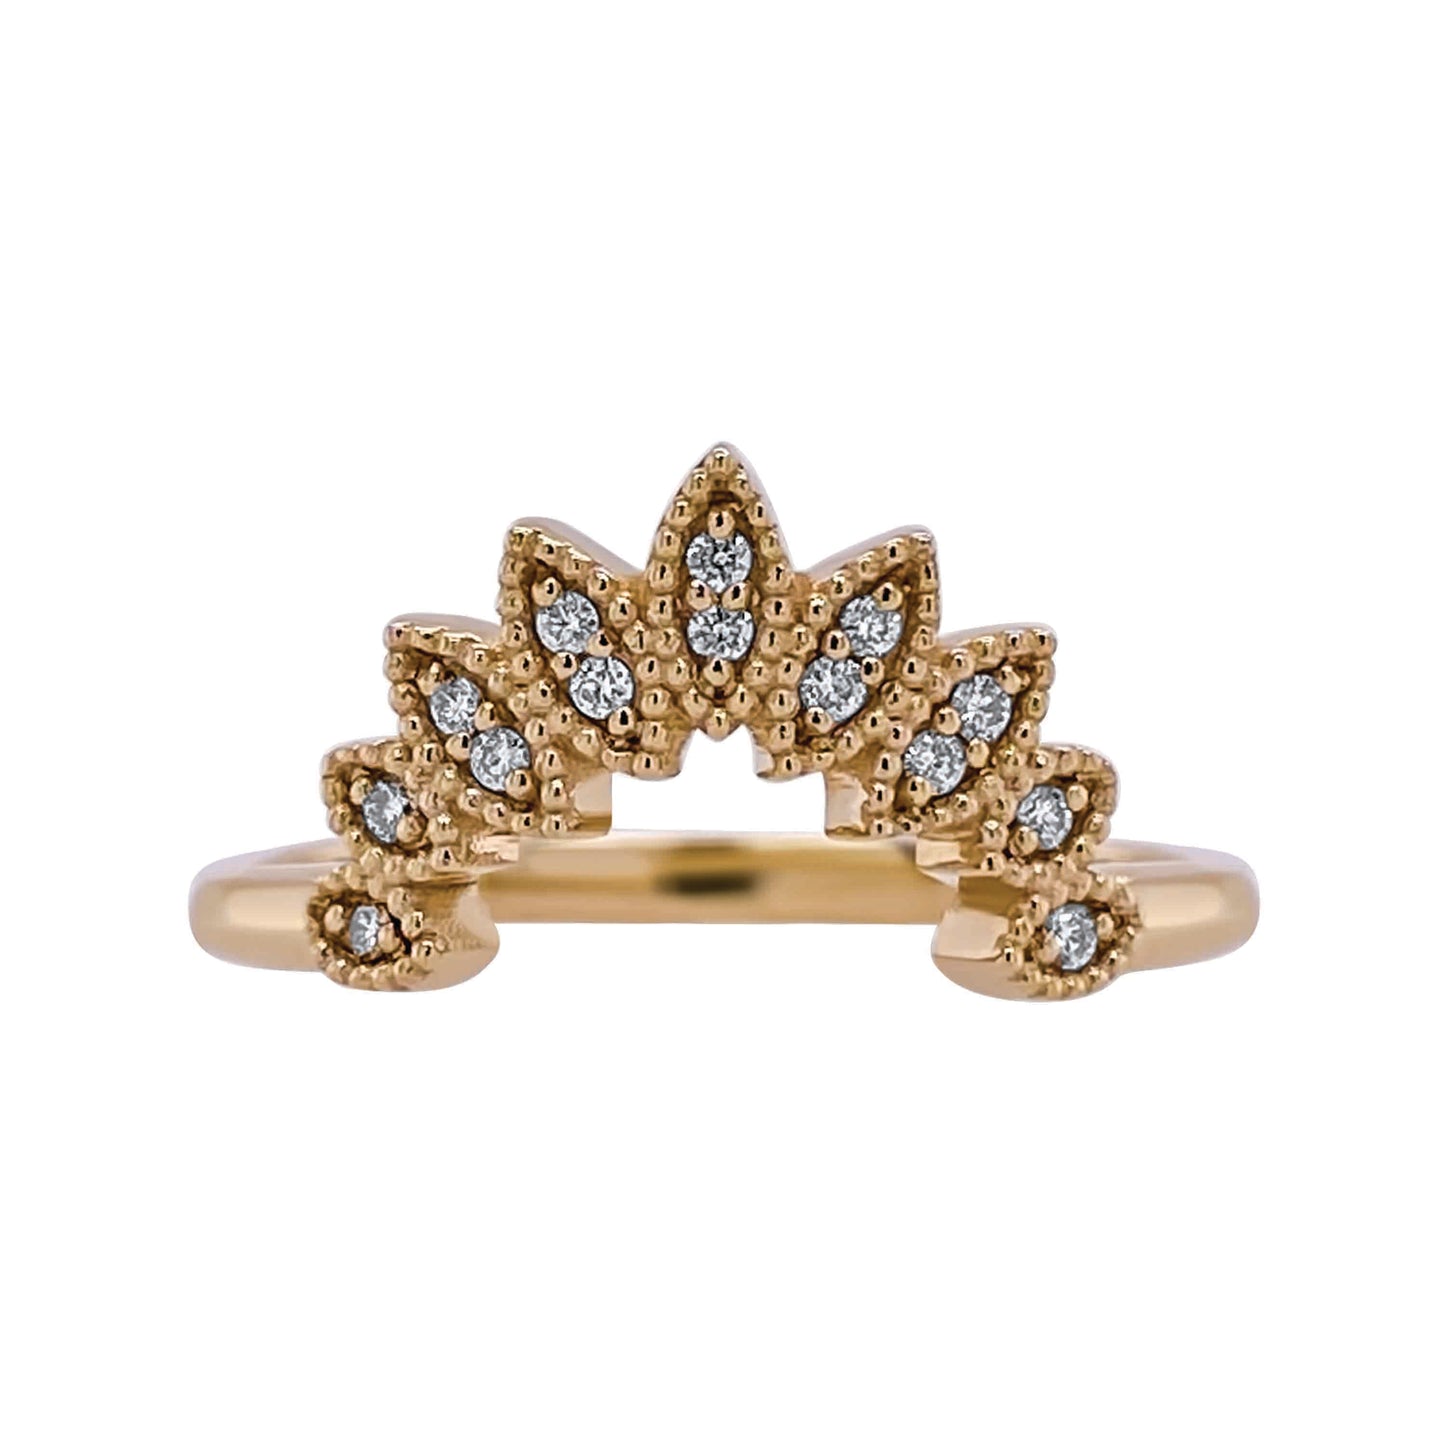 Design:  Delicate, vintage inspired and perfectly designed to frame any solitaire engagement ring with a leafy crown.   Details:  14K gold 0.04c total diamond weight Band approx. 1.8mm wide Miligrain leaves Low Profile Stacks with solitaires   